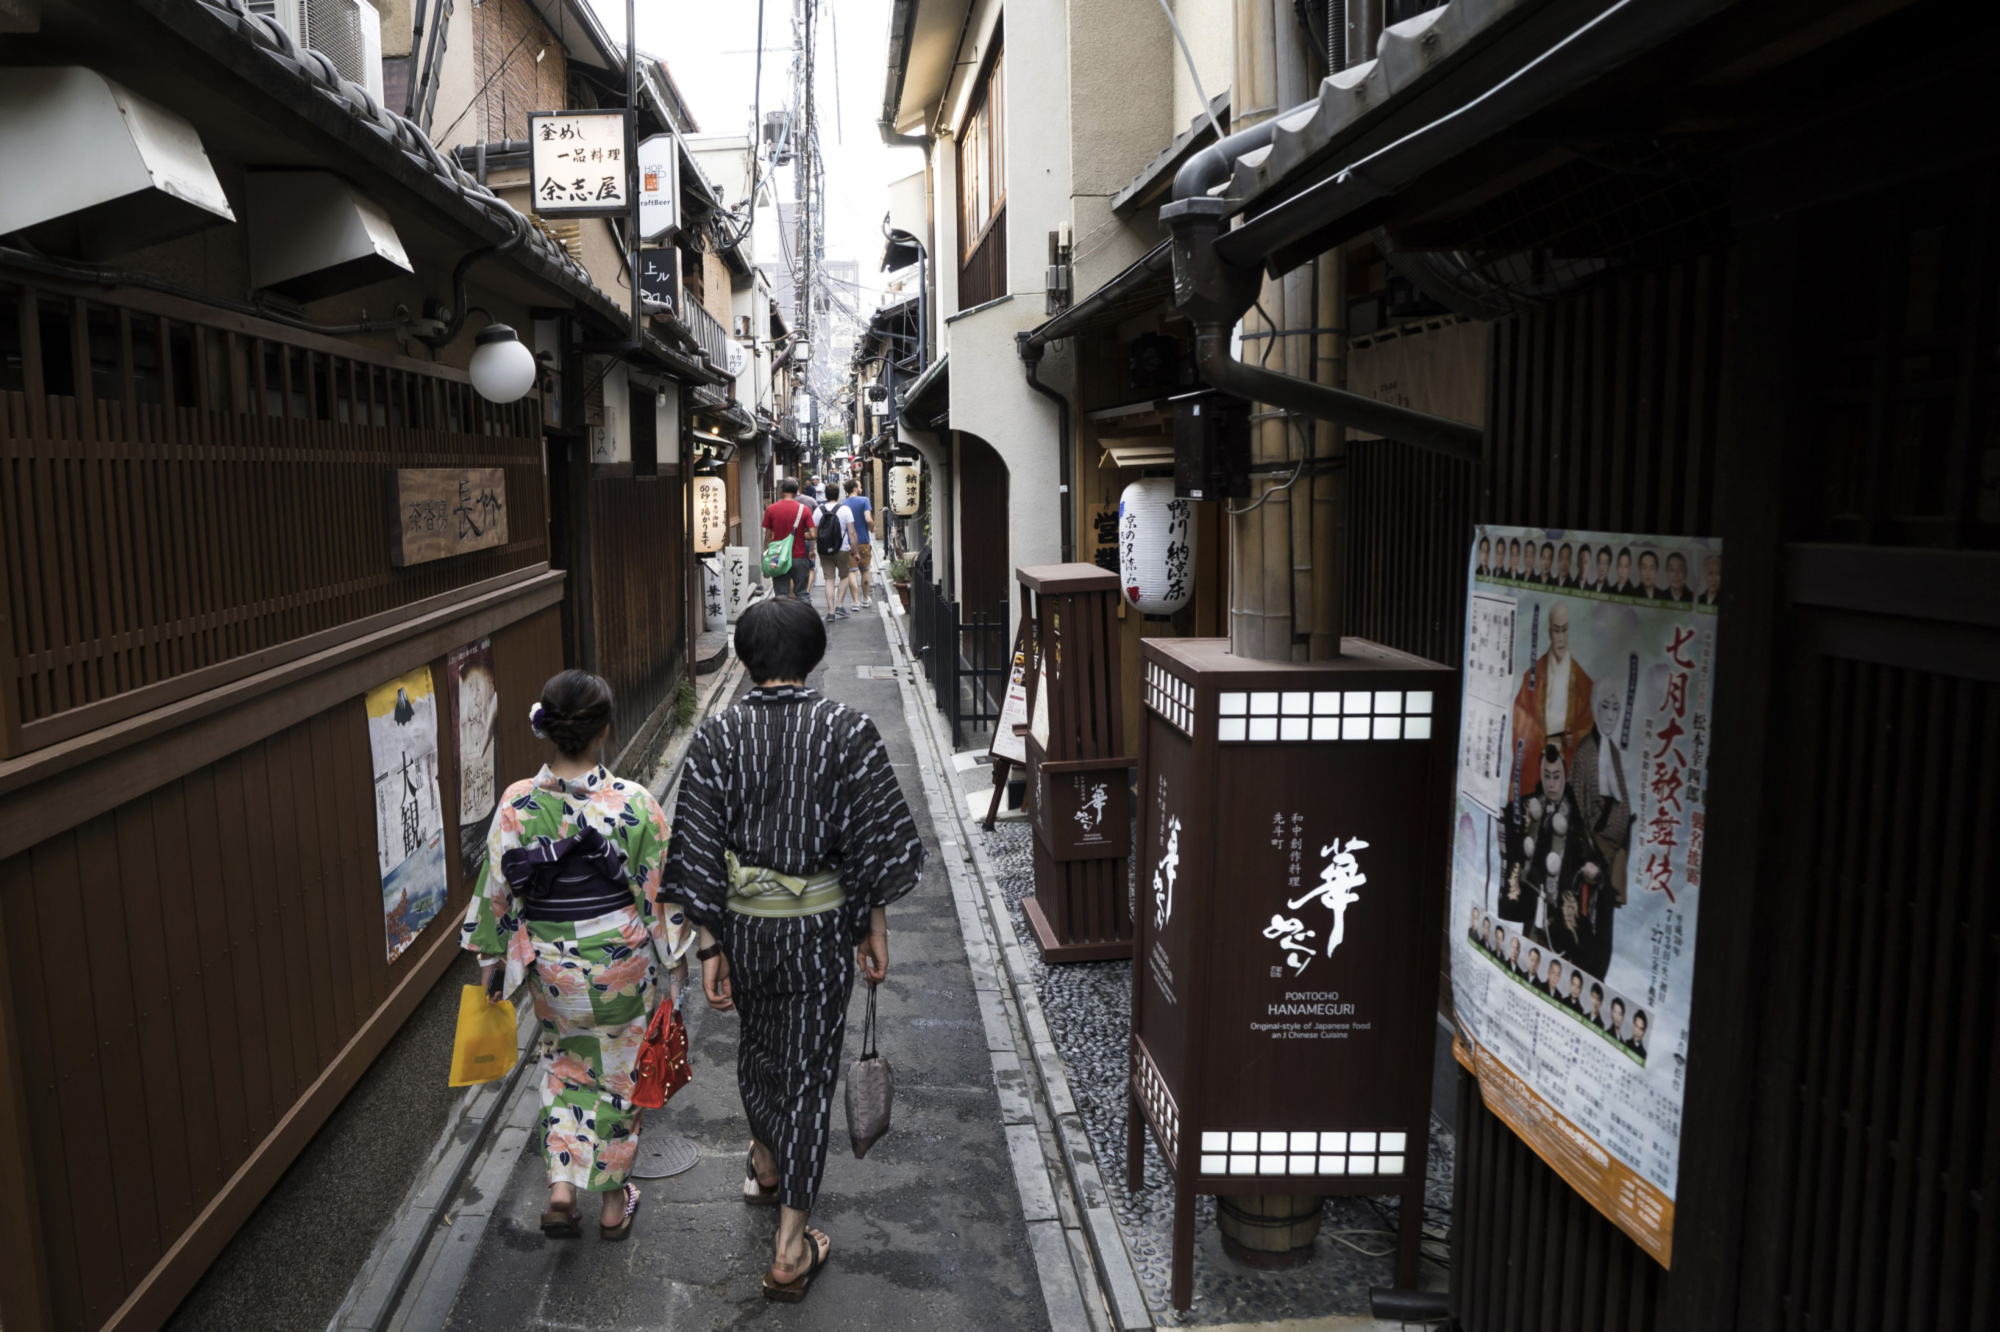 A couple wearing rental kimono walk through the Pontocho dining area of Kyoto. The tourist destination is considering the sale of debt to finance environmental, social and governance projects, according to its mayor. | BLOOMBERG